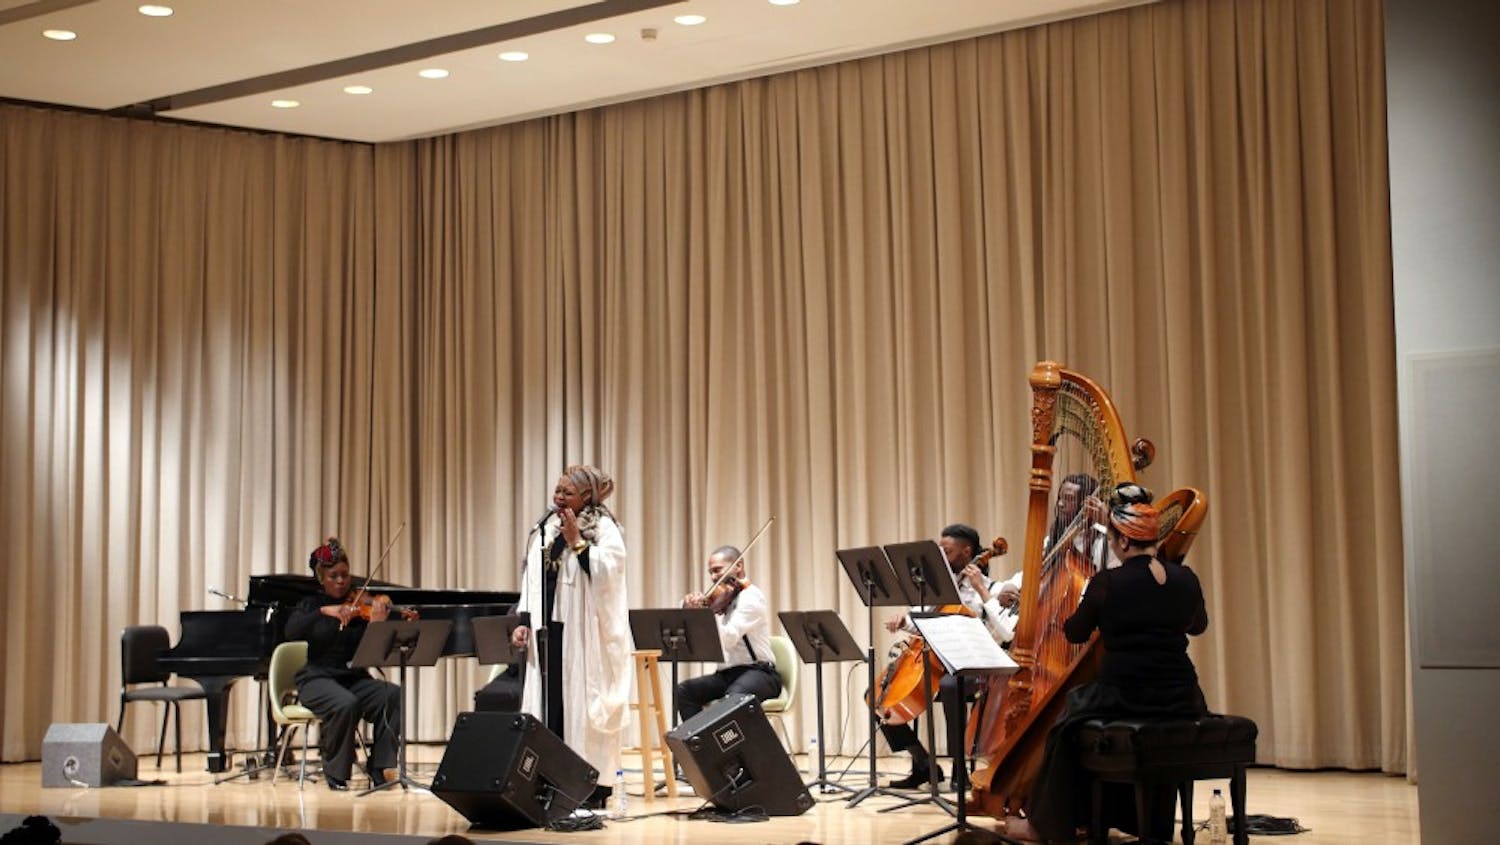 Nina Simone’s music came to life at Albright-Knox on Thursday night thanks to Buffalo musicians Drea D’Nur and Roostock Republic’s Dear Nina tribute.